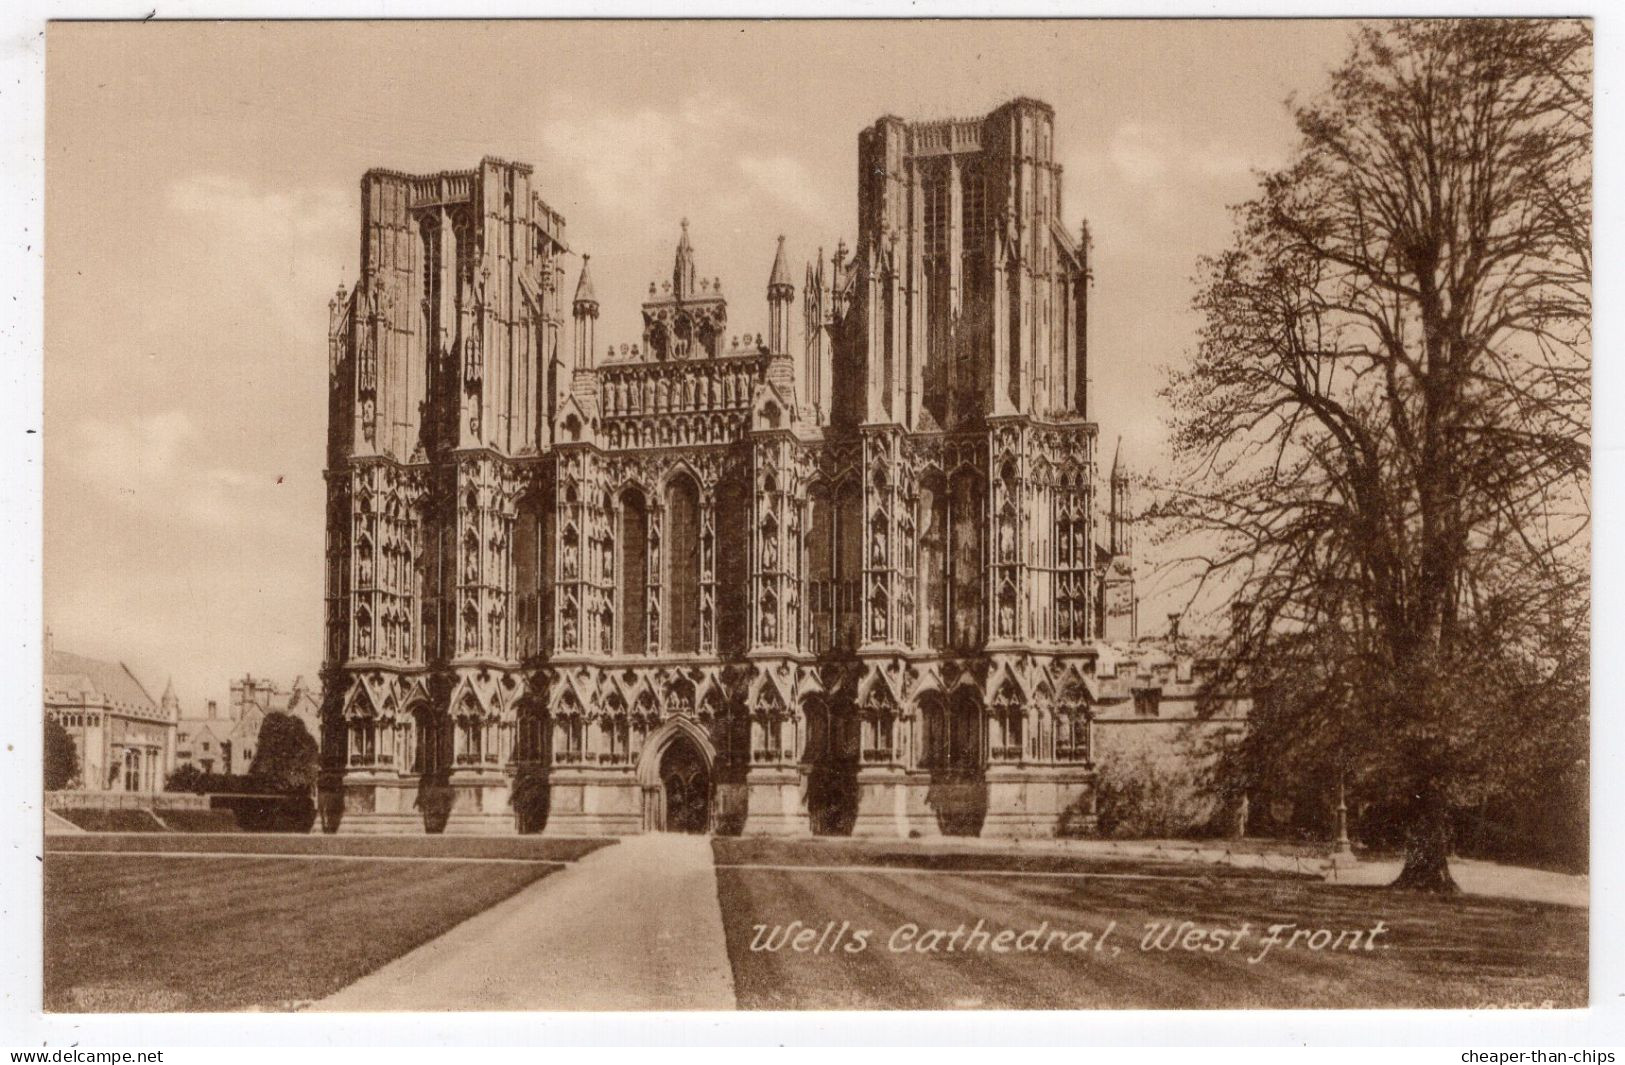 WELLS CATHEDRAL, West Front. - Frith 1055 B - Wells